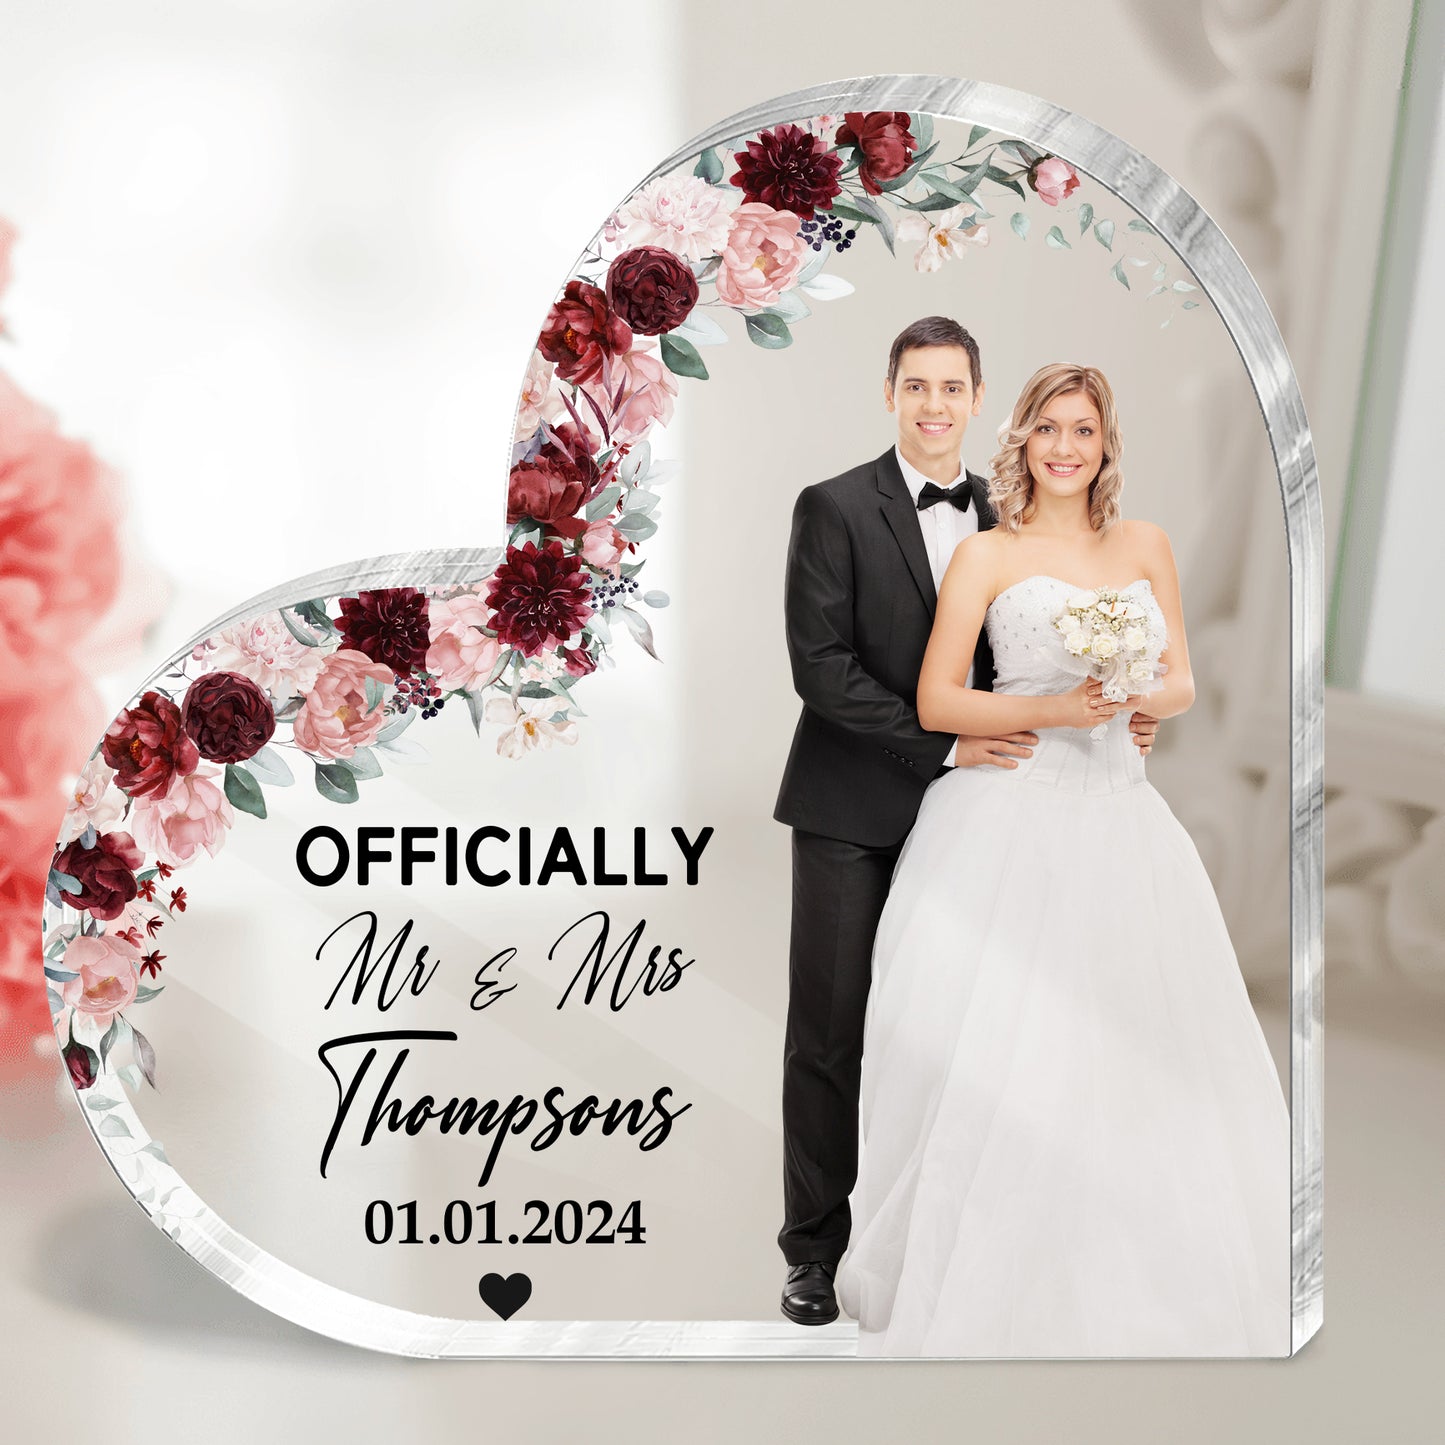 Couple - Officially Mr & Mrs - Personalized Acrylic Photo Plaque